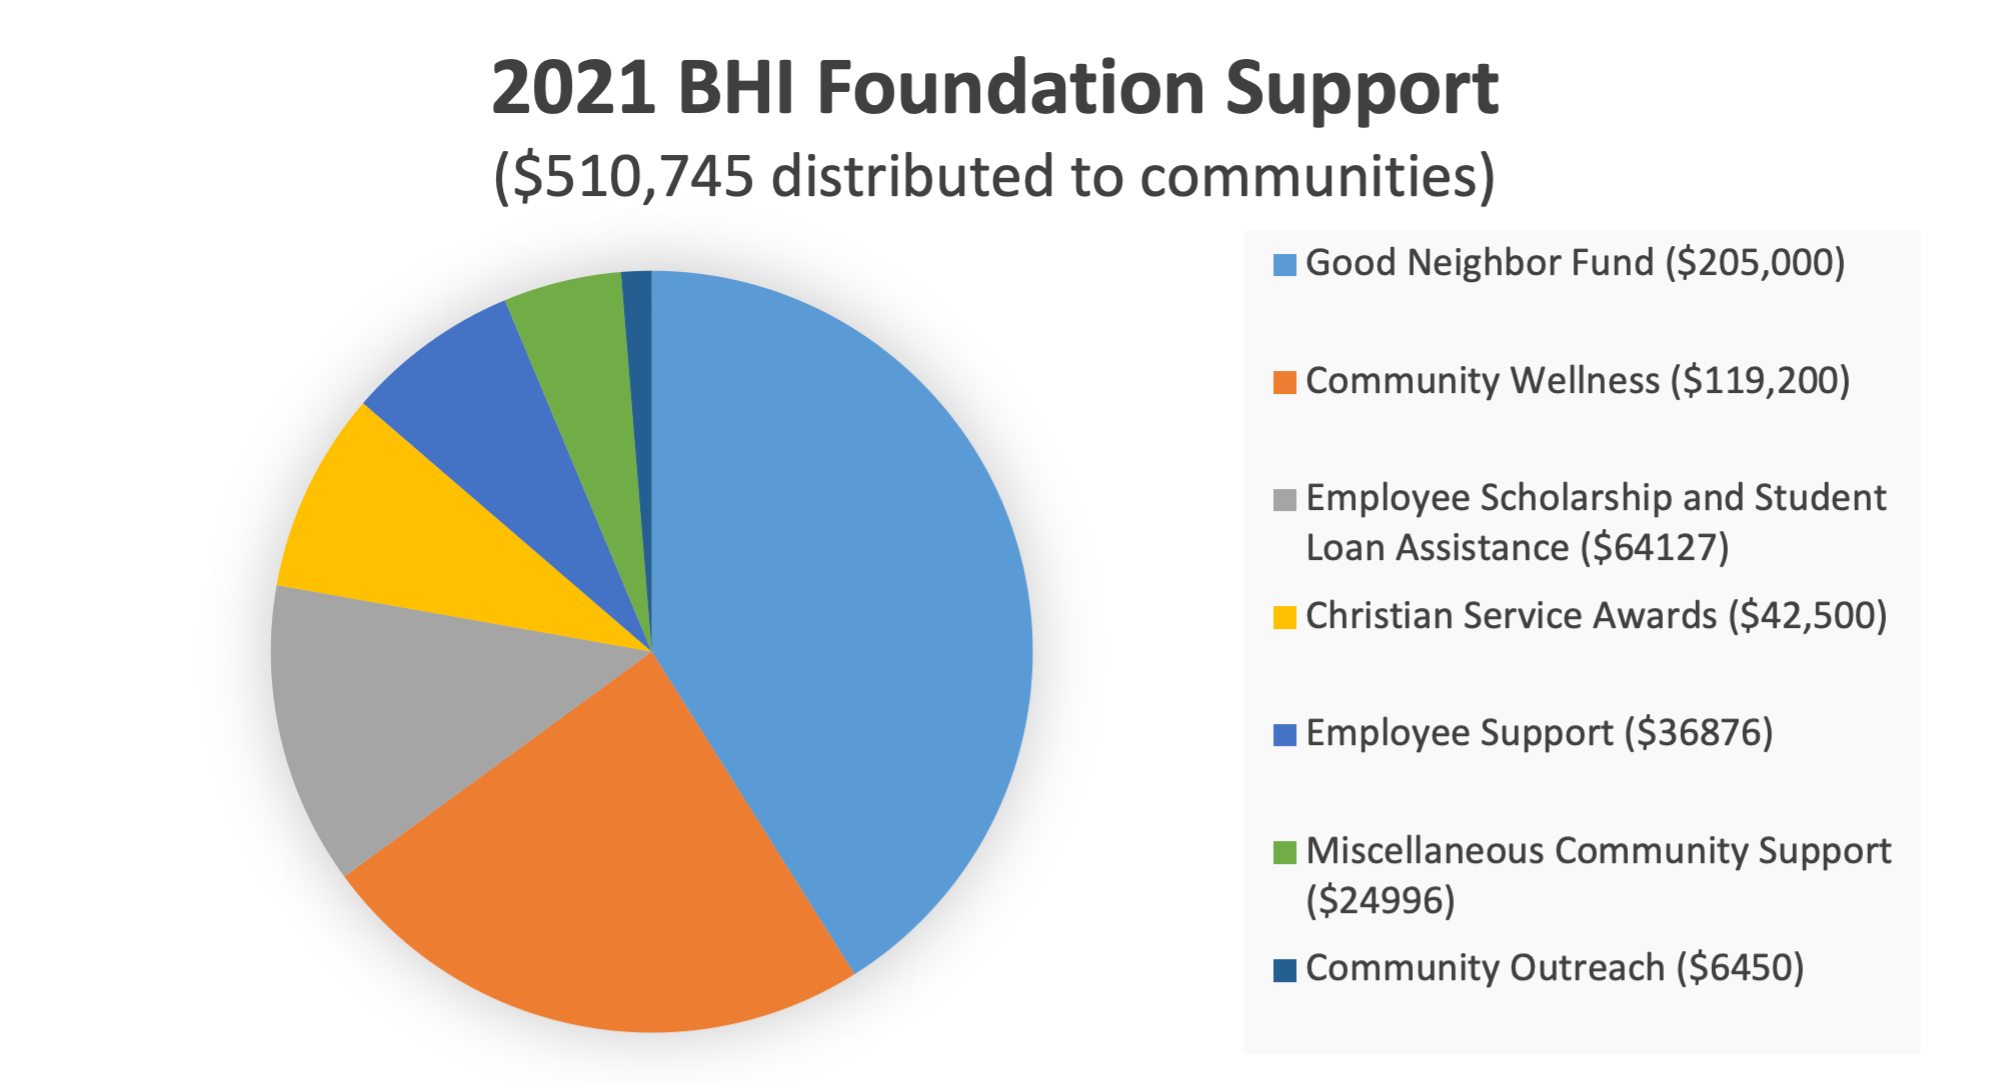 For more information or to contribute to the BHI Foundation, please contact Jennifer Zvokel, Foundation Director, at 317-708-6944 or jzvokel@bhiseniorliving.org